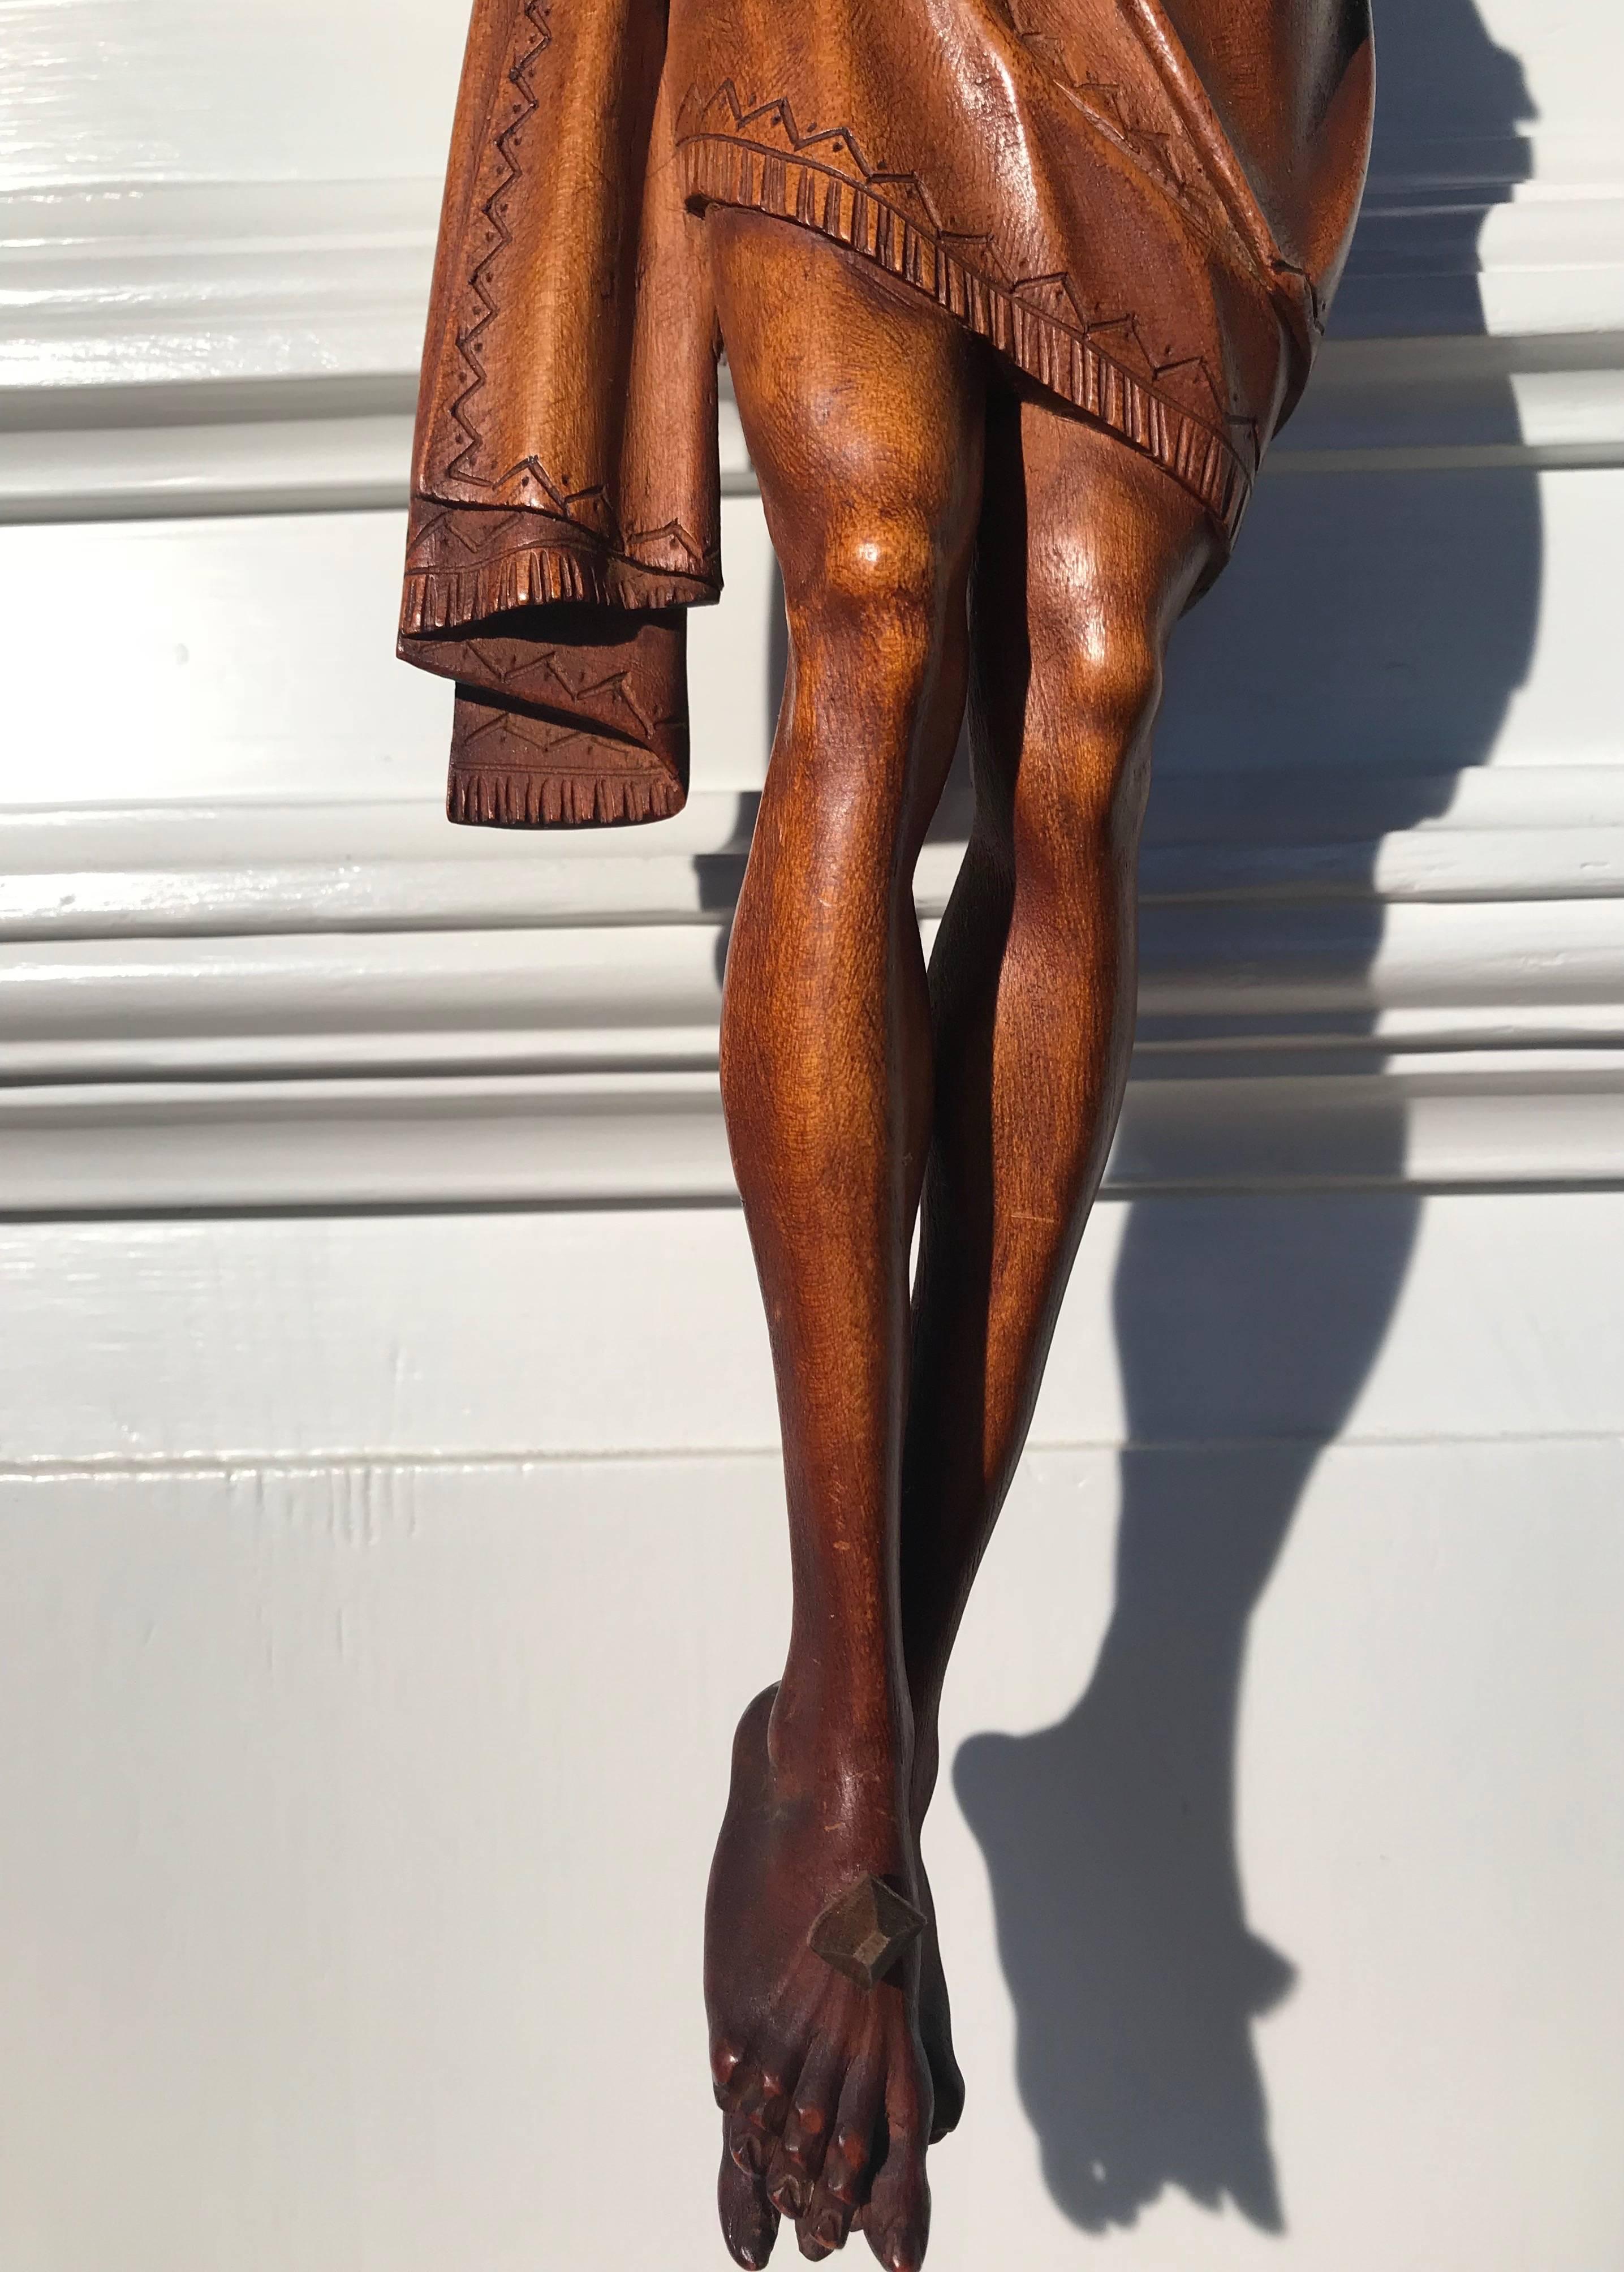 20th Century Early 1900s Finest Handcarved Wood Corpus of Christ Sculpture for Wall Mounting